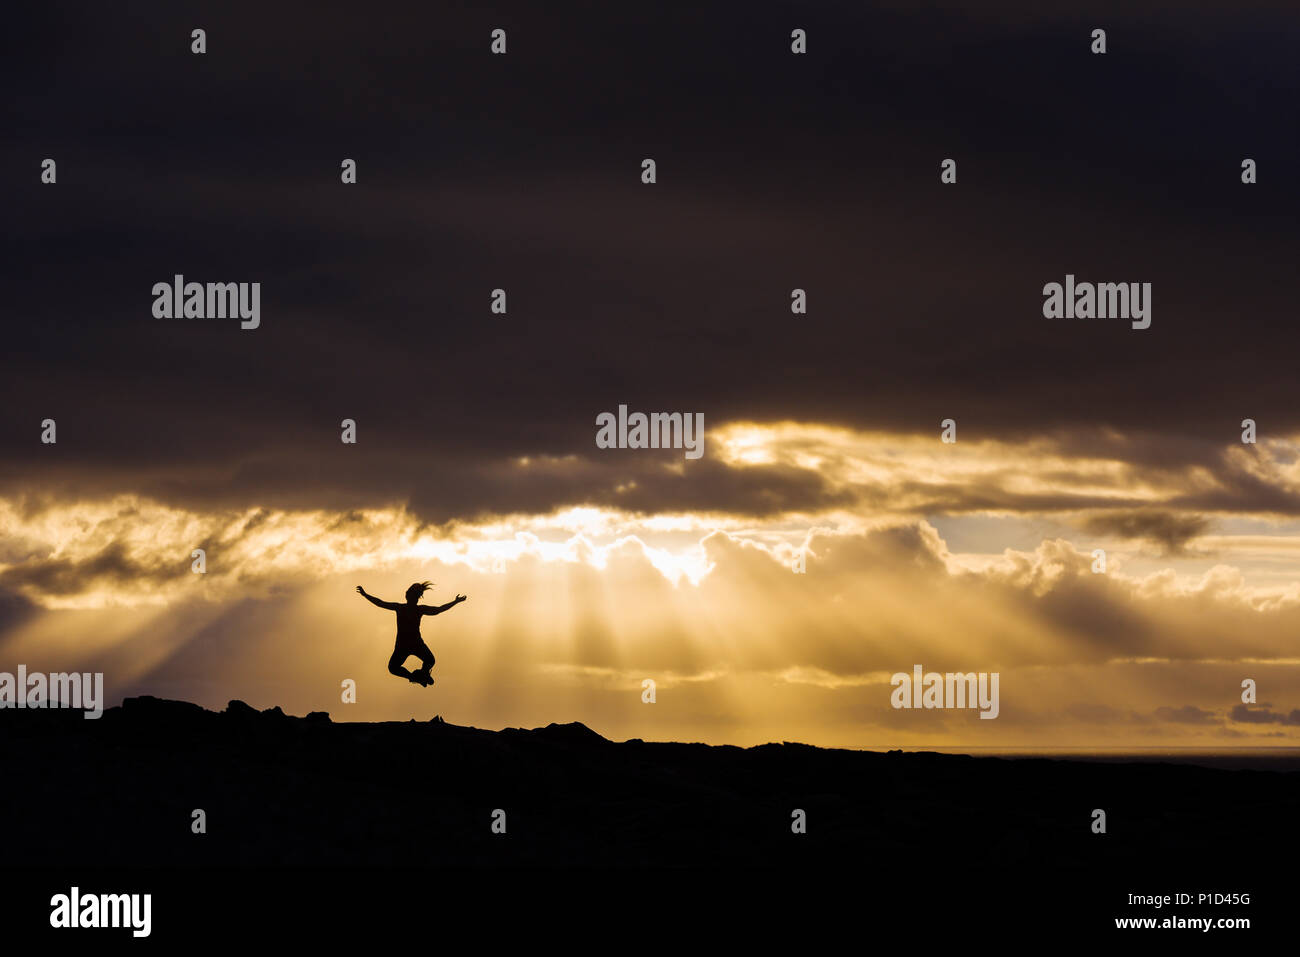 Woman jumping in the air and clicking heels together during dramatic sunset Stock Photo